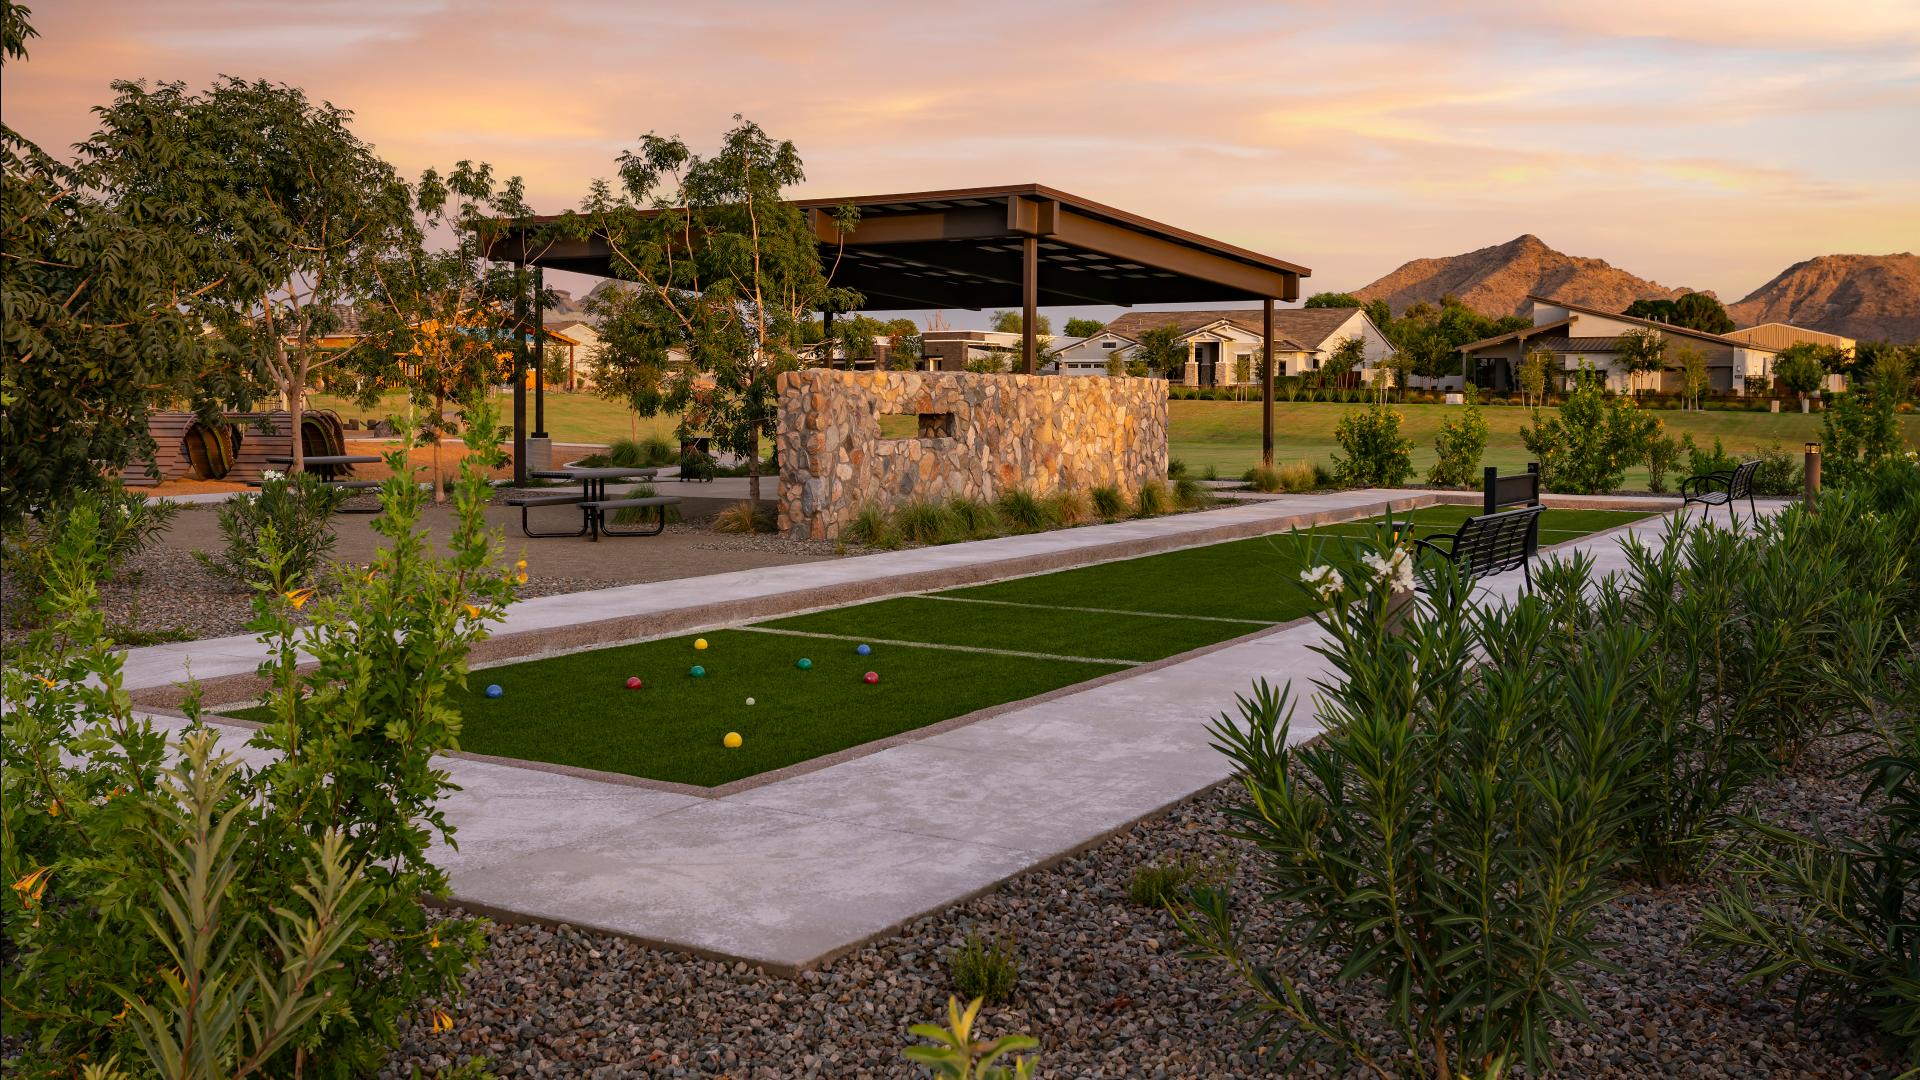 Bocce ball court with beautiful mountain views